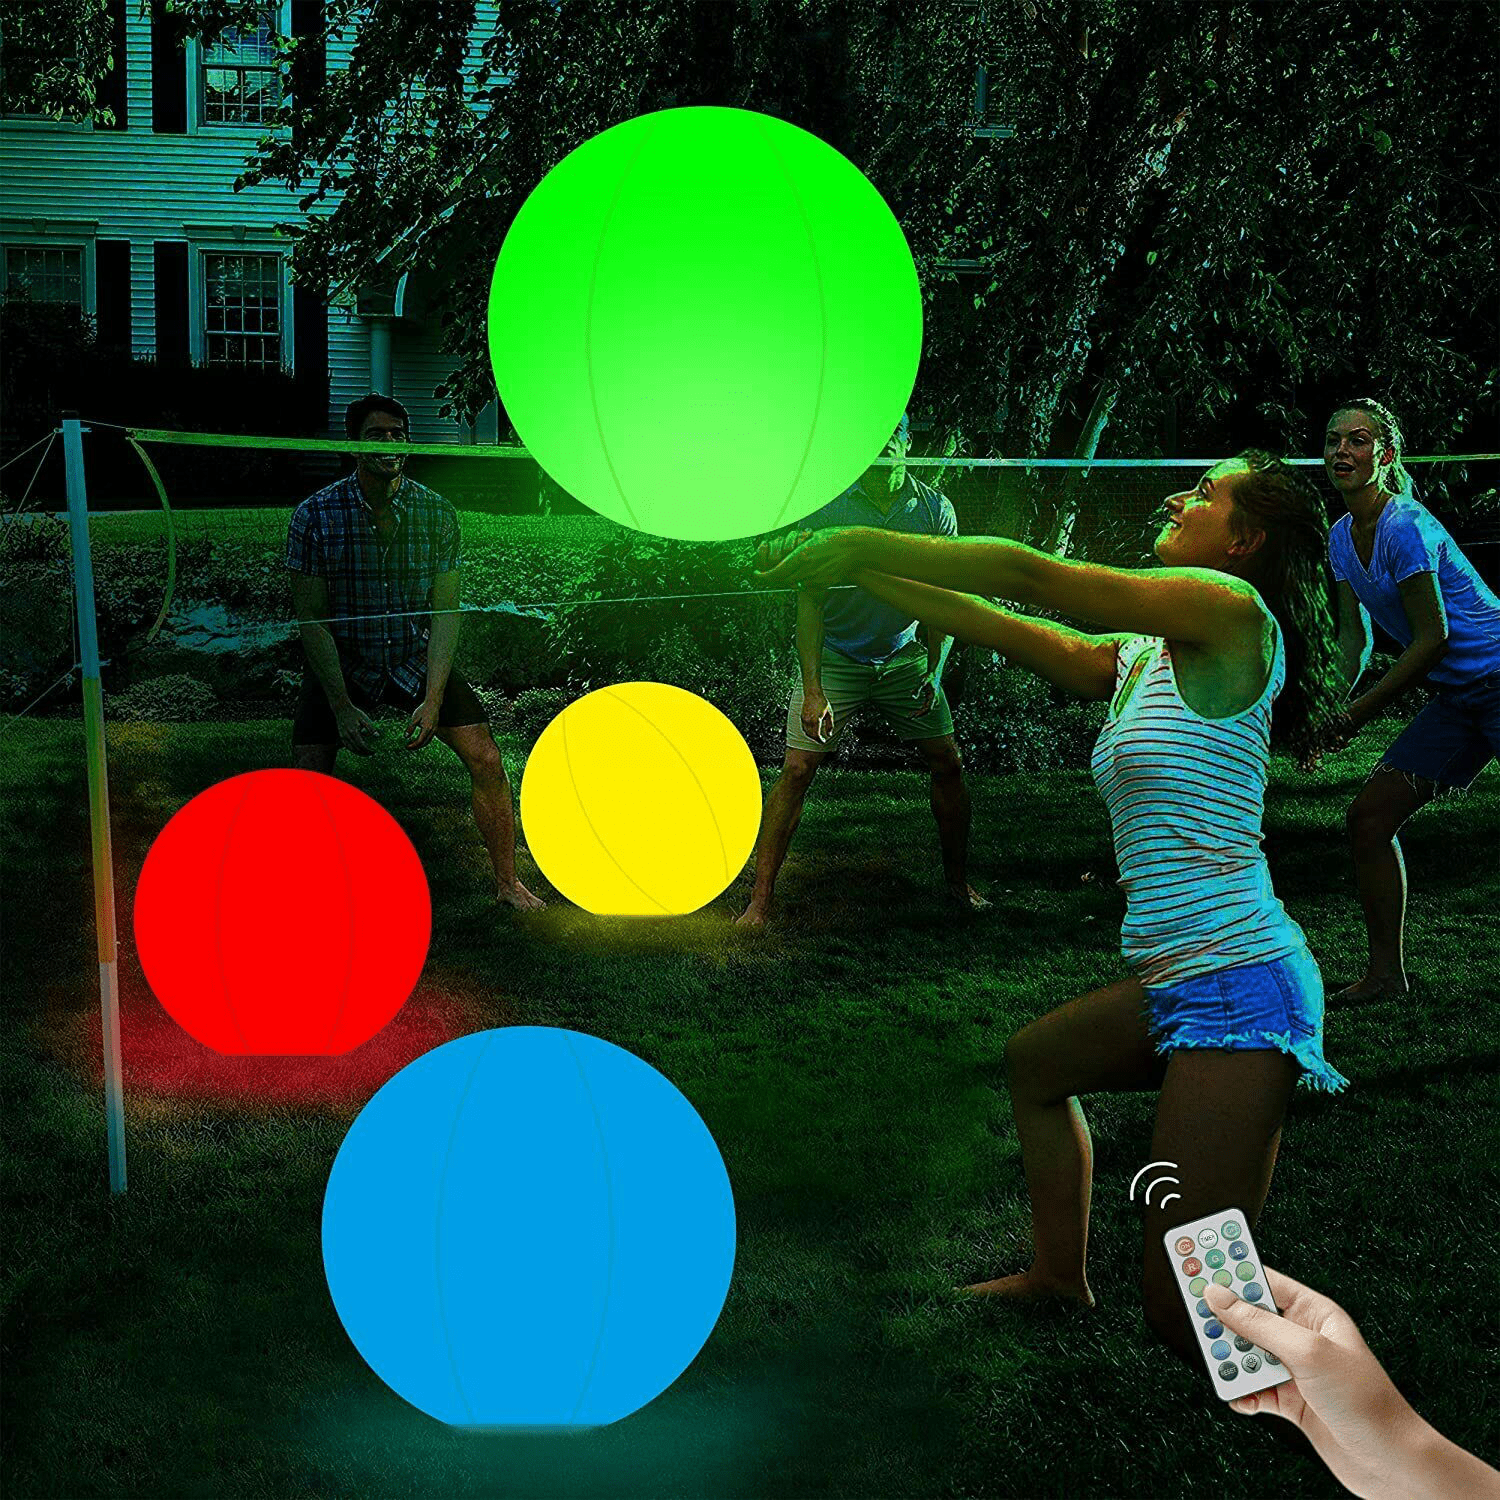 Float or Hang in Pool Garden Backyard Pond Party Decorations Floating Pool Lights Inflatable Wateproof RBG Lights Accessories Pack of 2 Battery Powered Color Changing Balls